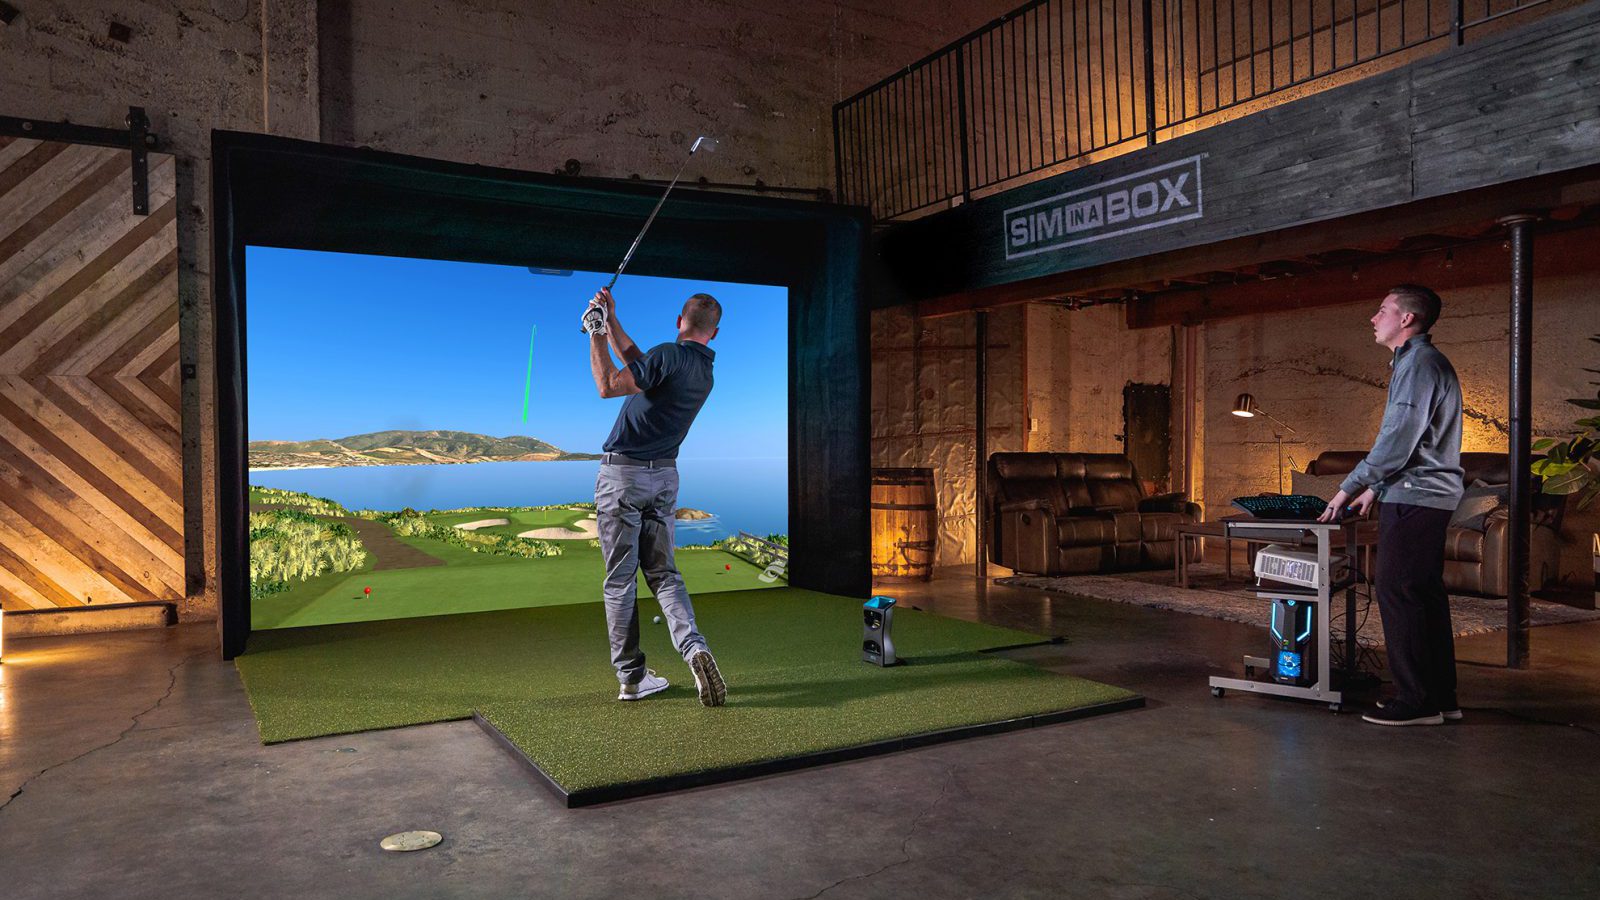 Golfer swings club indoors using the foresight performance analysis technology while expert looks on